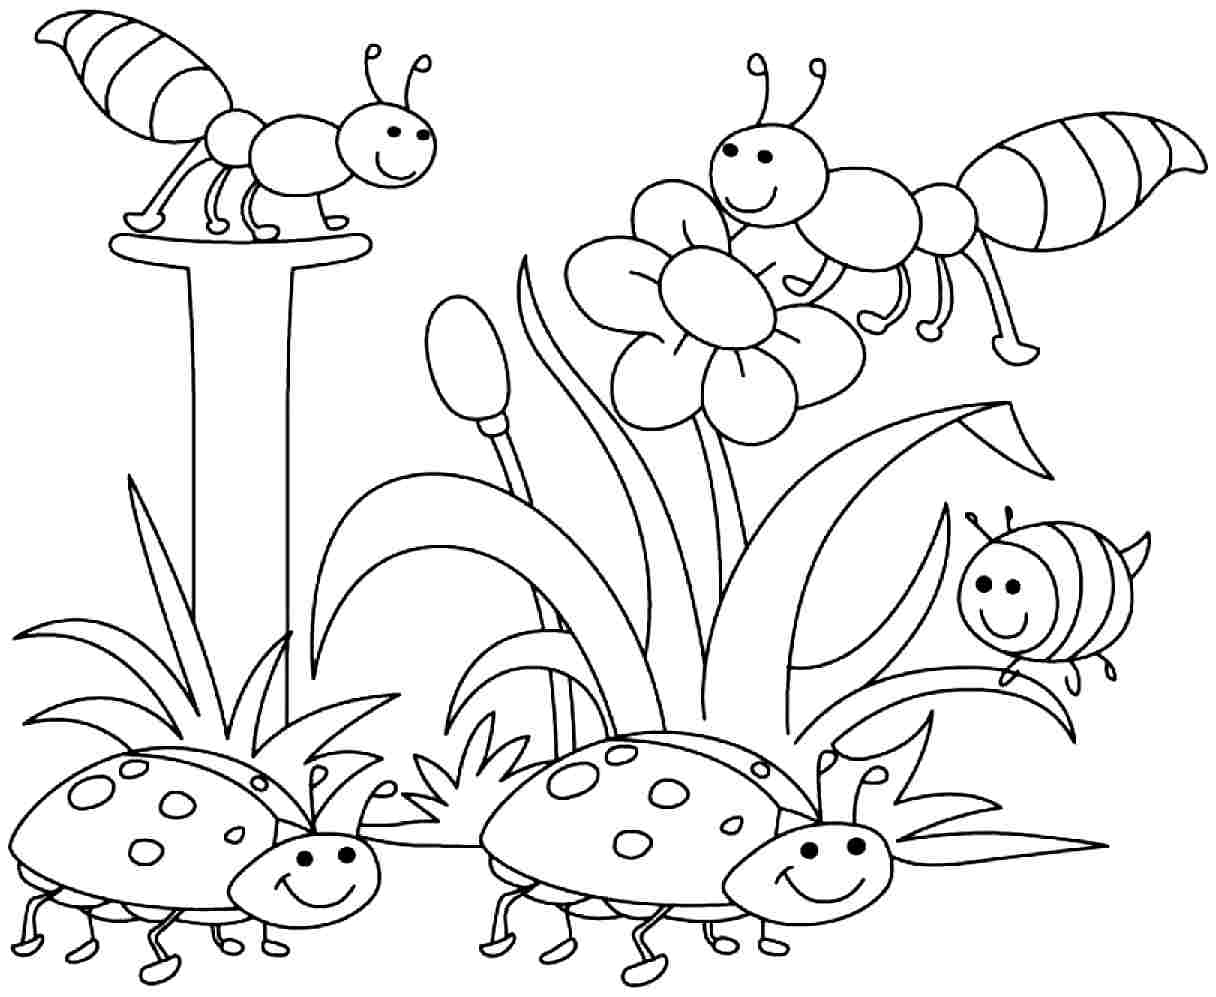 Spring Coloring Pages To Print pdf To Print - Coloring pages